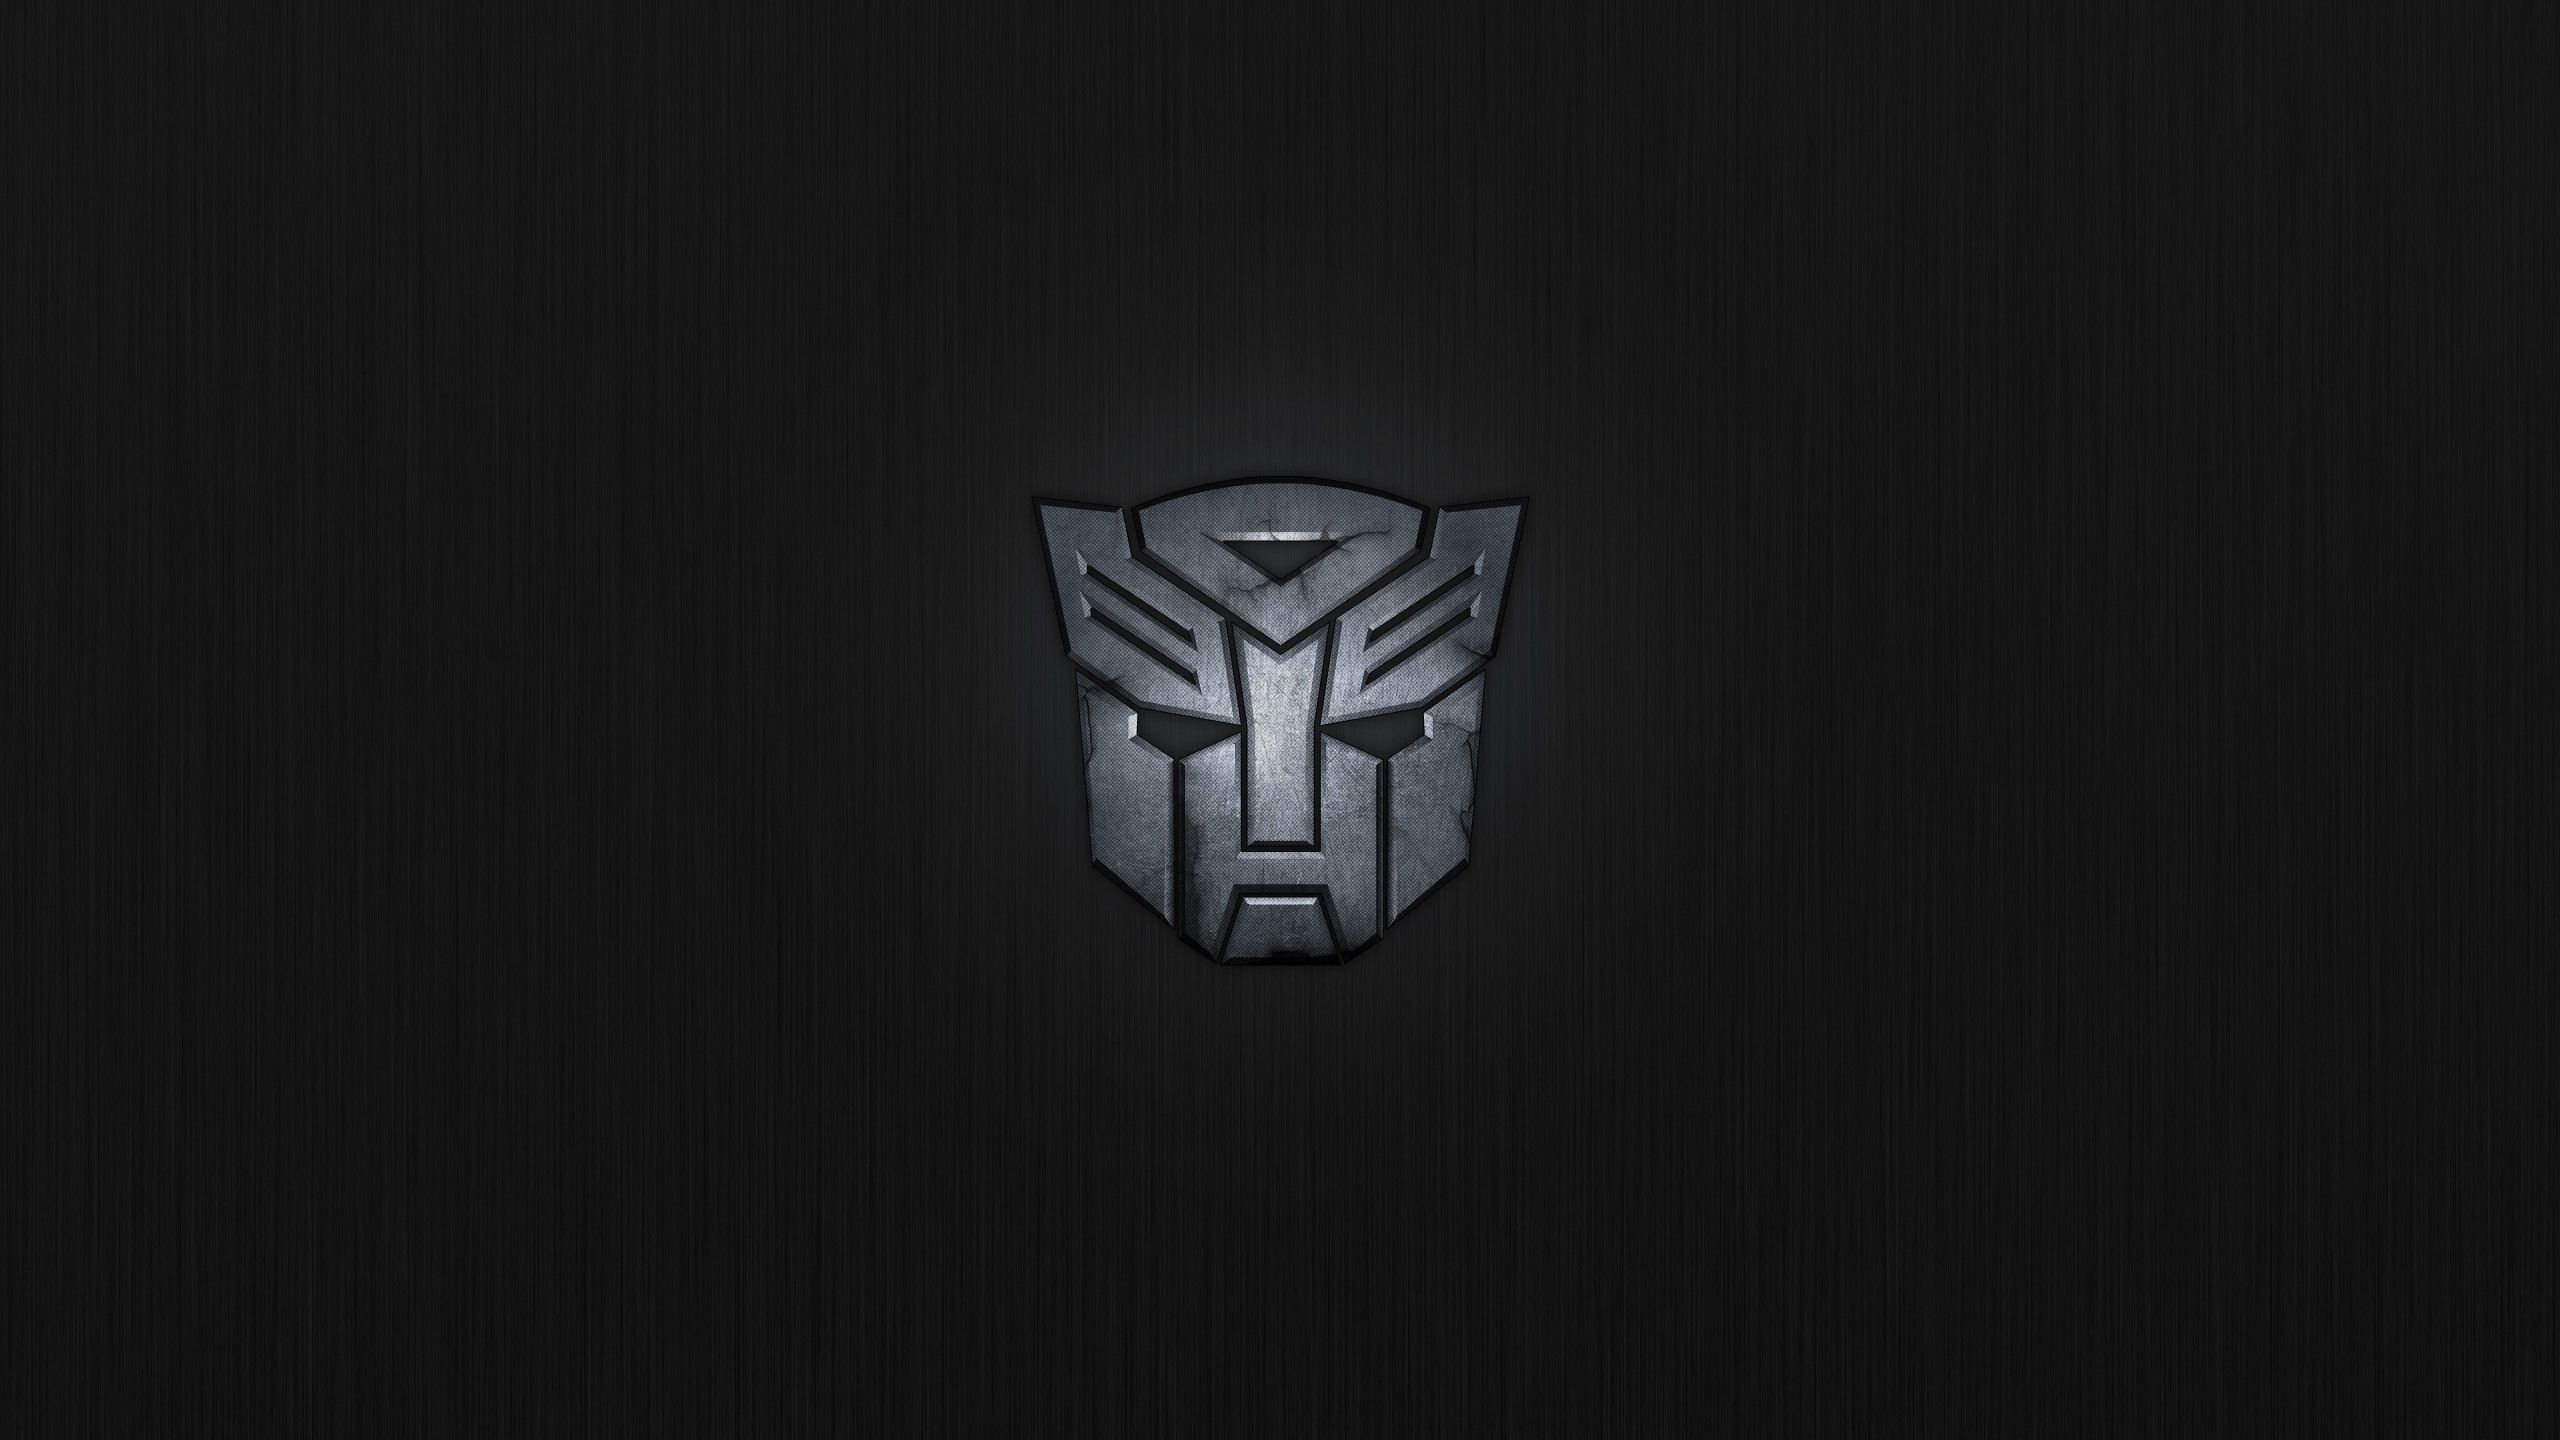 HD Transformers Wallpapers & Backgrounds For Free Download | Transformer  logo, Logo wallpaper hd, Autobots